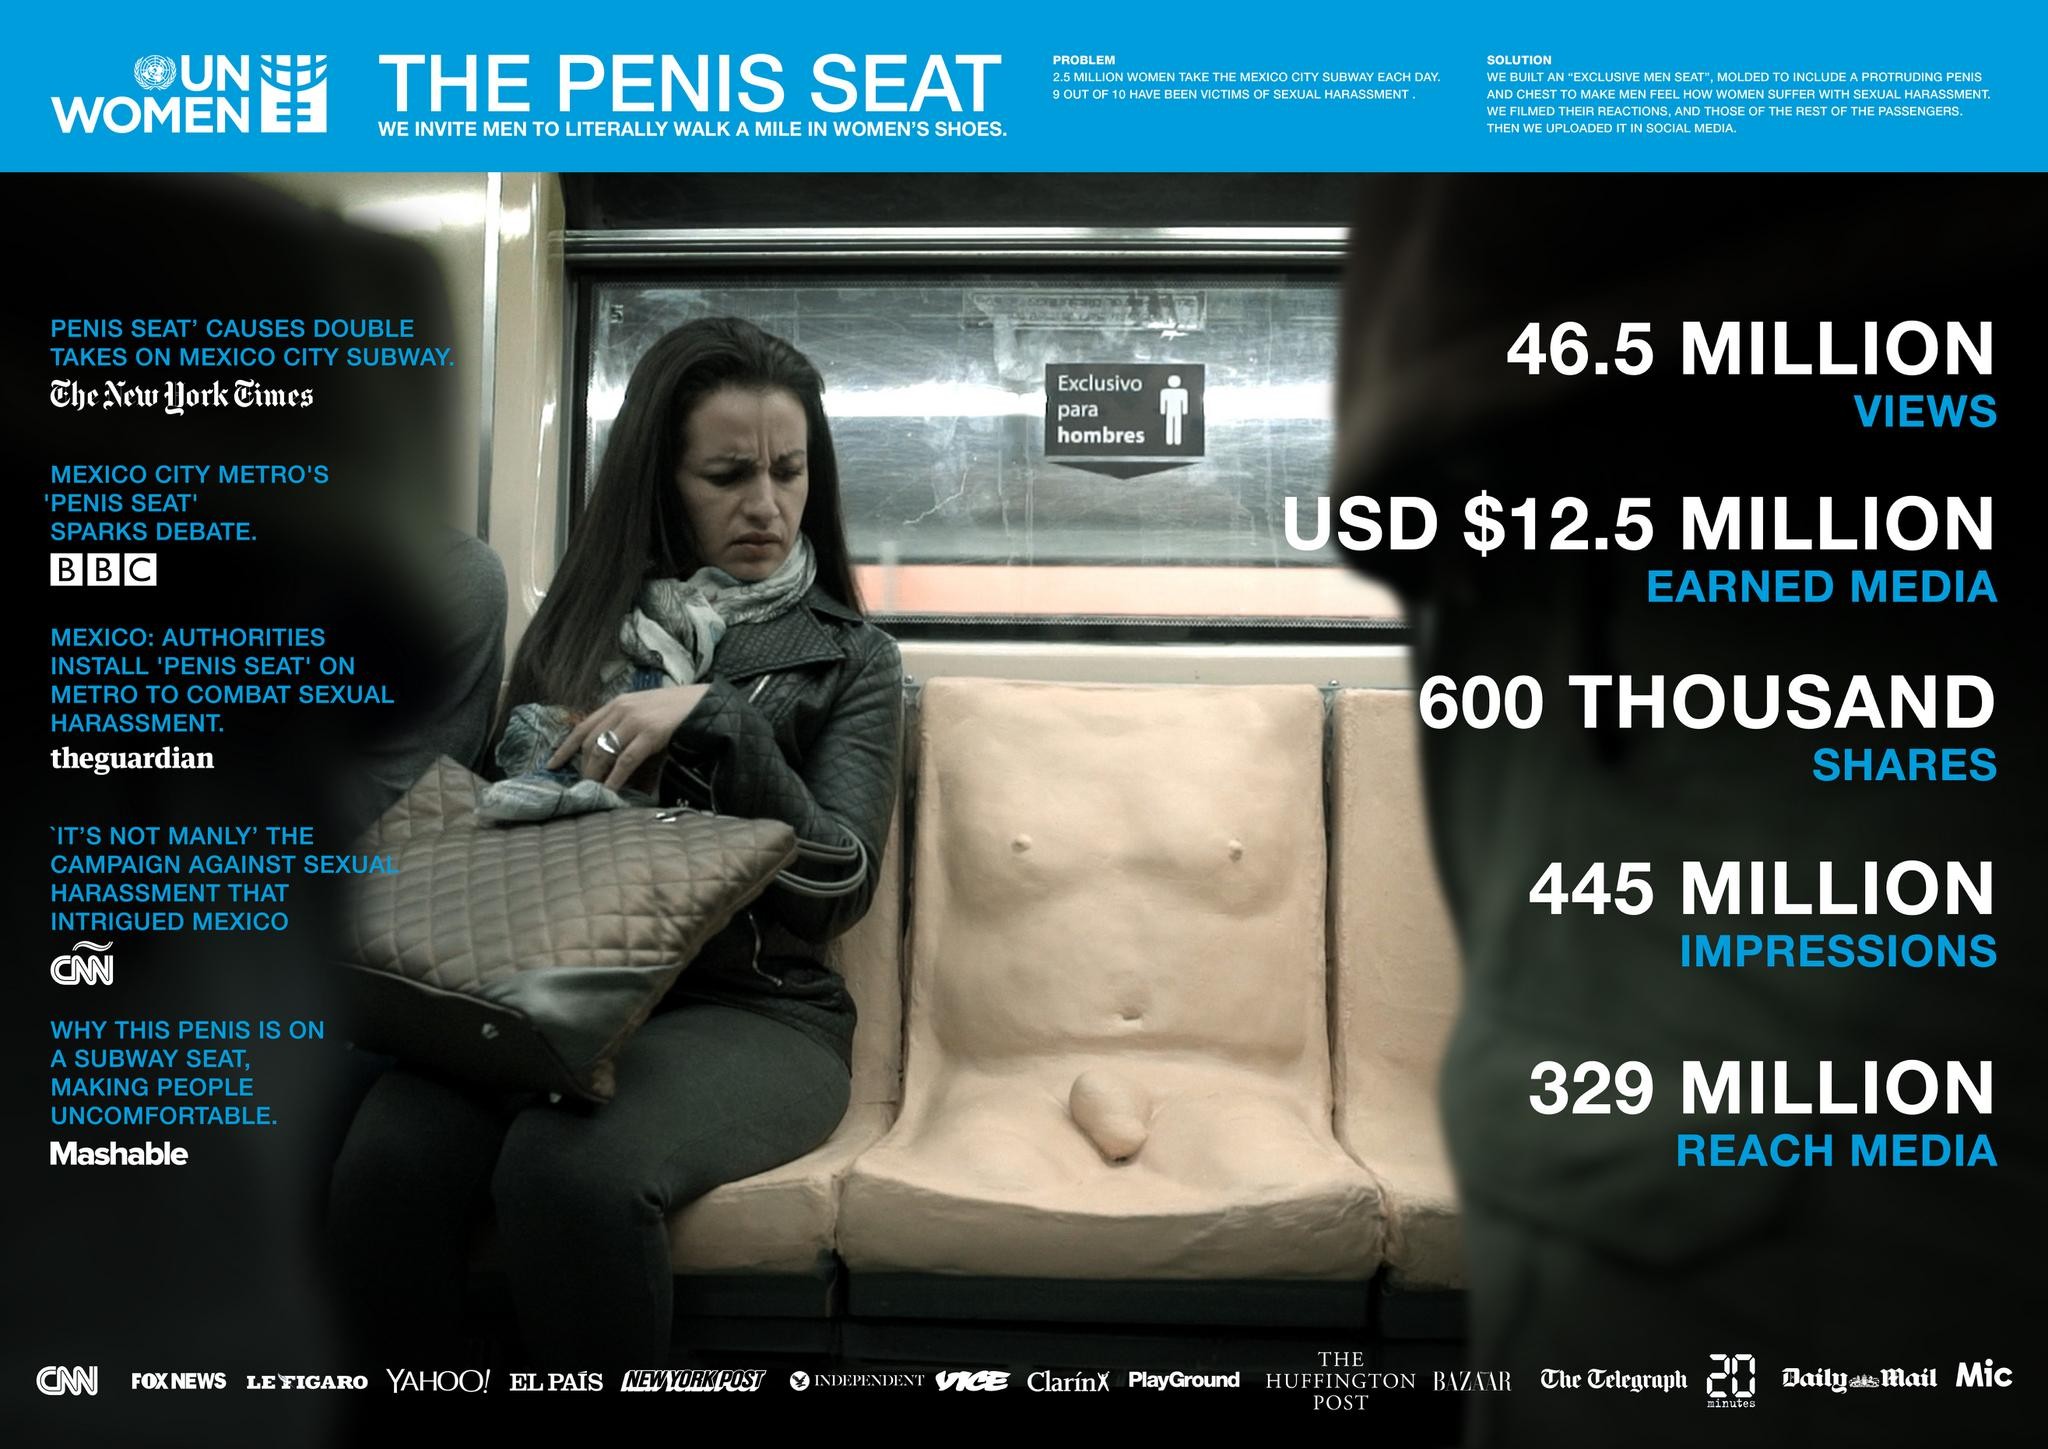 THE PENIS SEAT